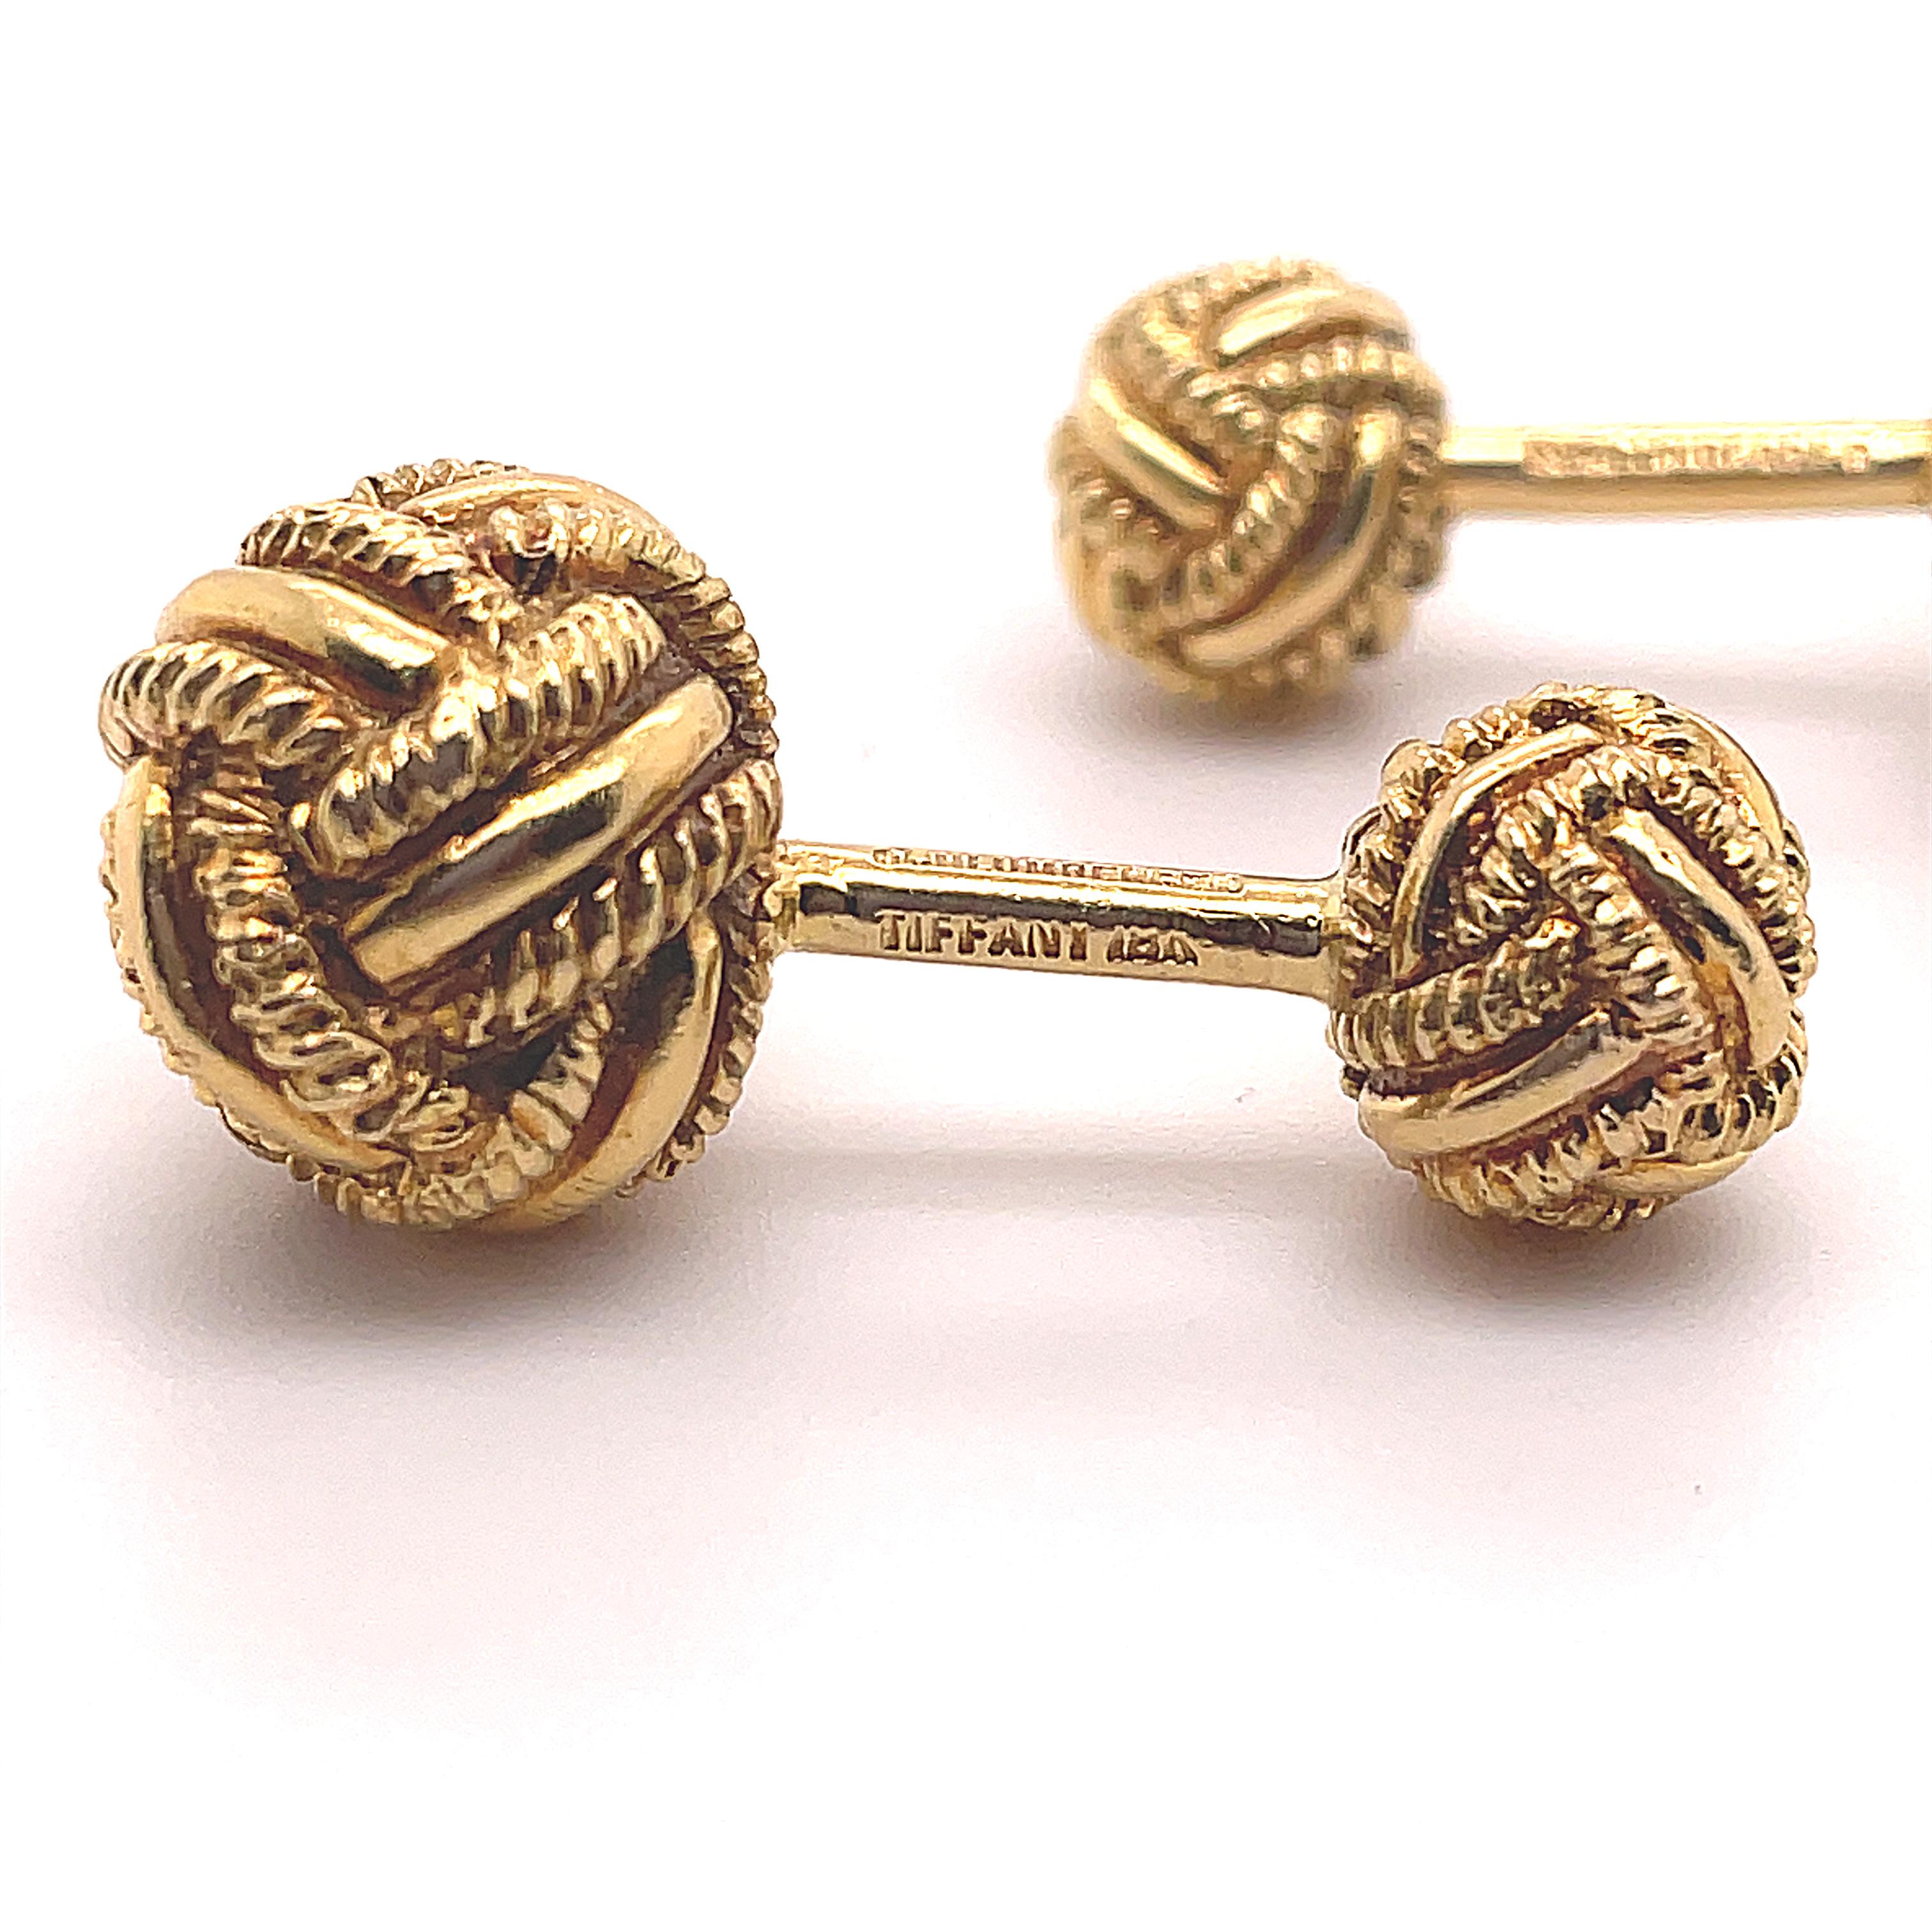 A pair of Tiffany & Co. Jean Schlumberger 18 karat yellow gold knotted cufflinks, circa 1960.

These smart vintage cufflinks feature two vari-sized intricately detailed knots between T-bar fittings.

The solid and secure yellow gold T-bar fitting